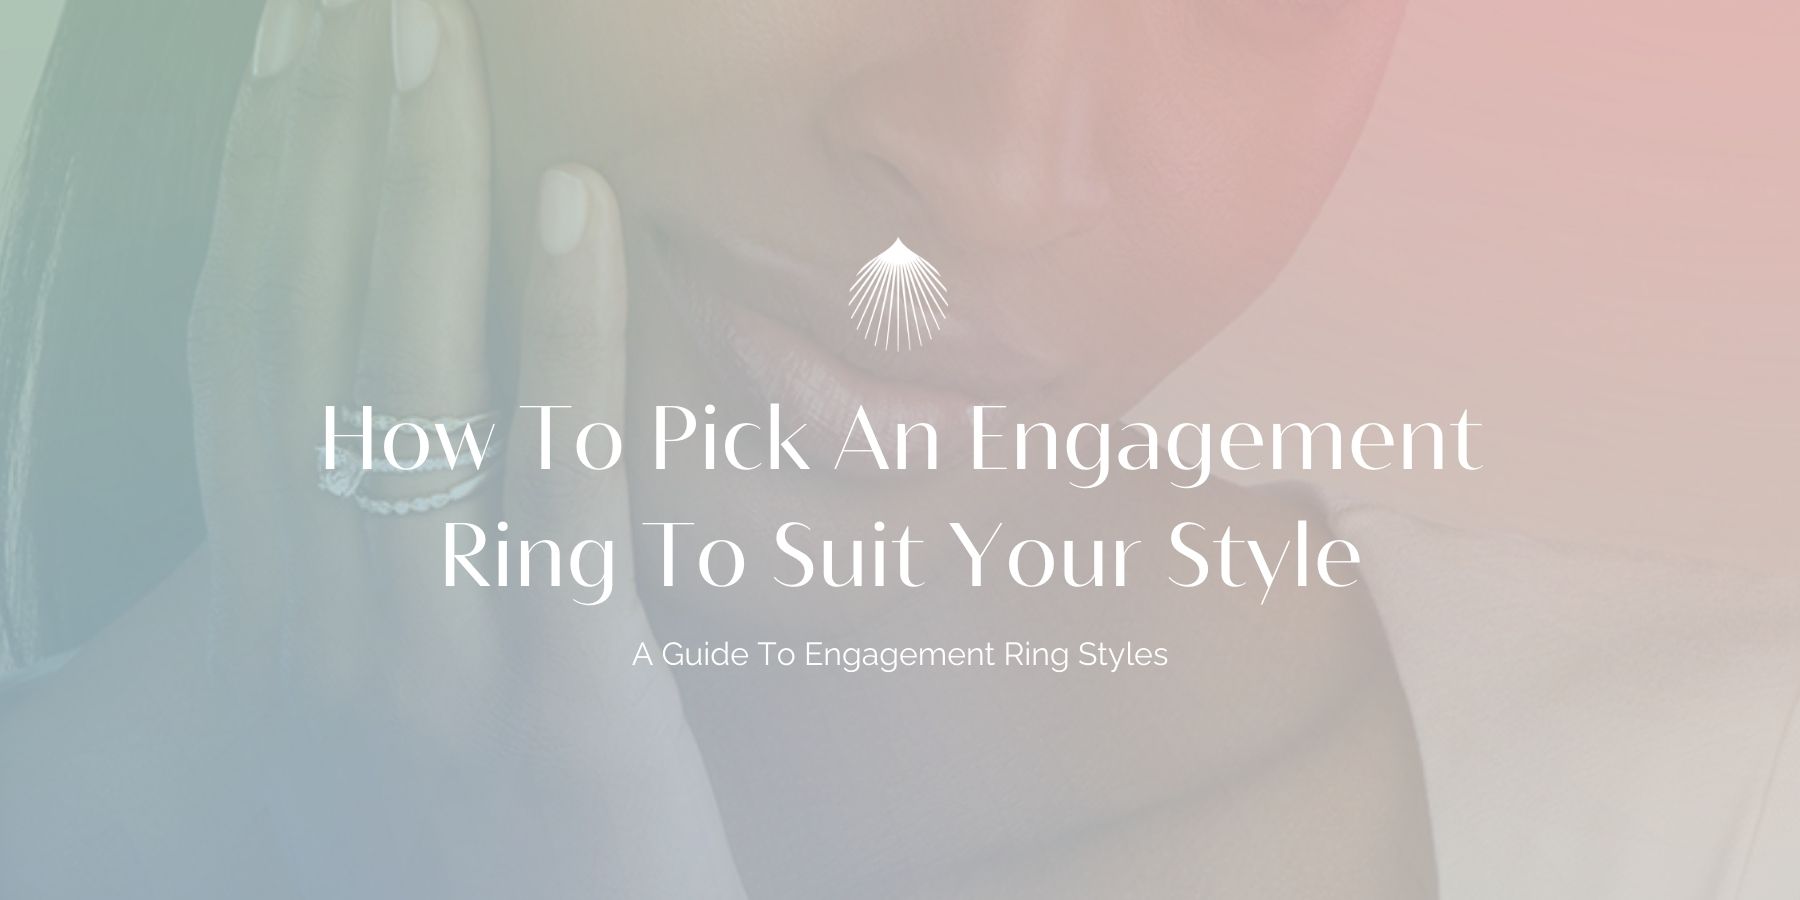 What's your recommendation for an engagement ring? - Quora